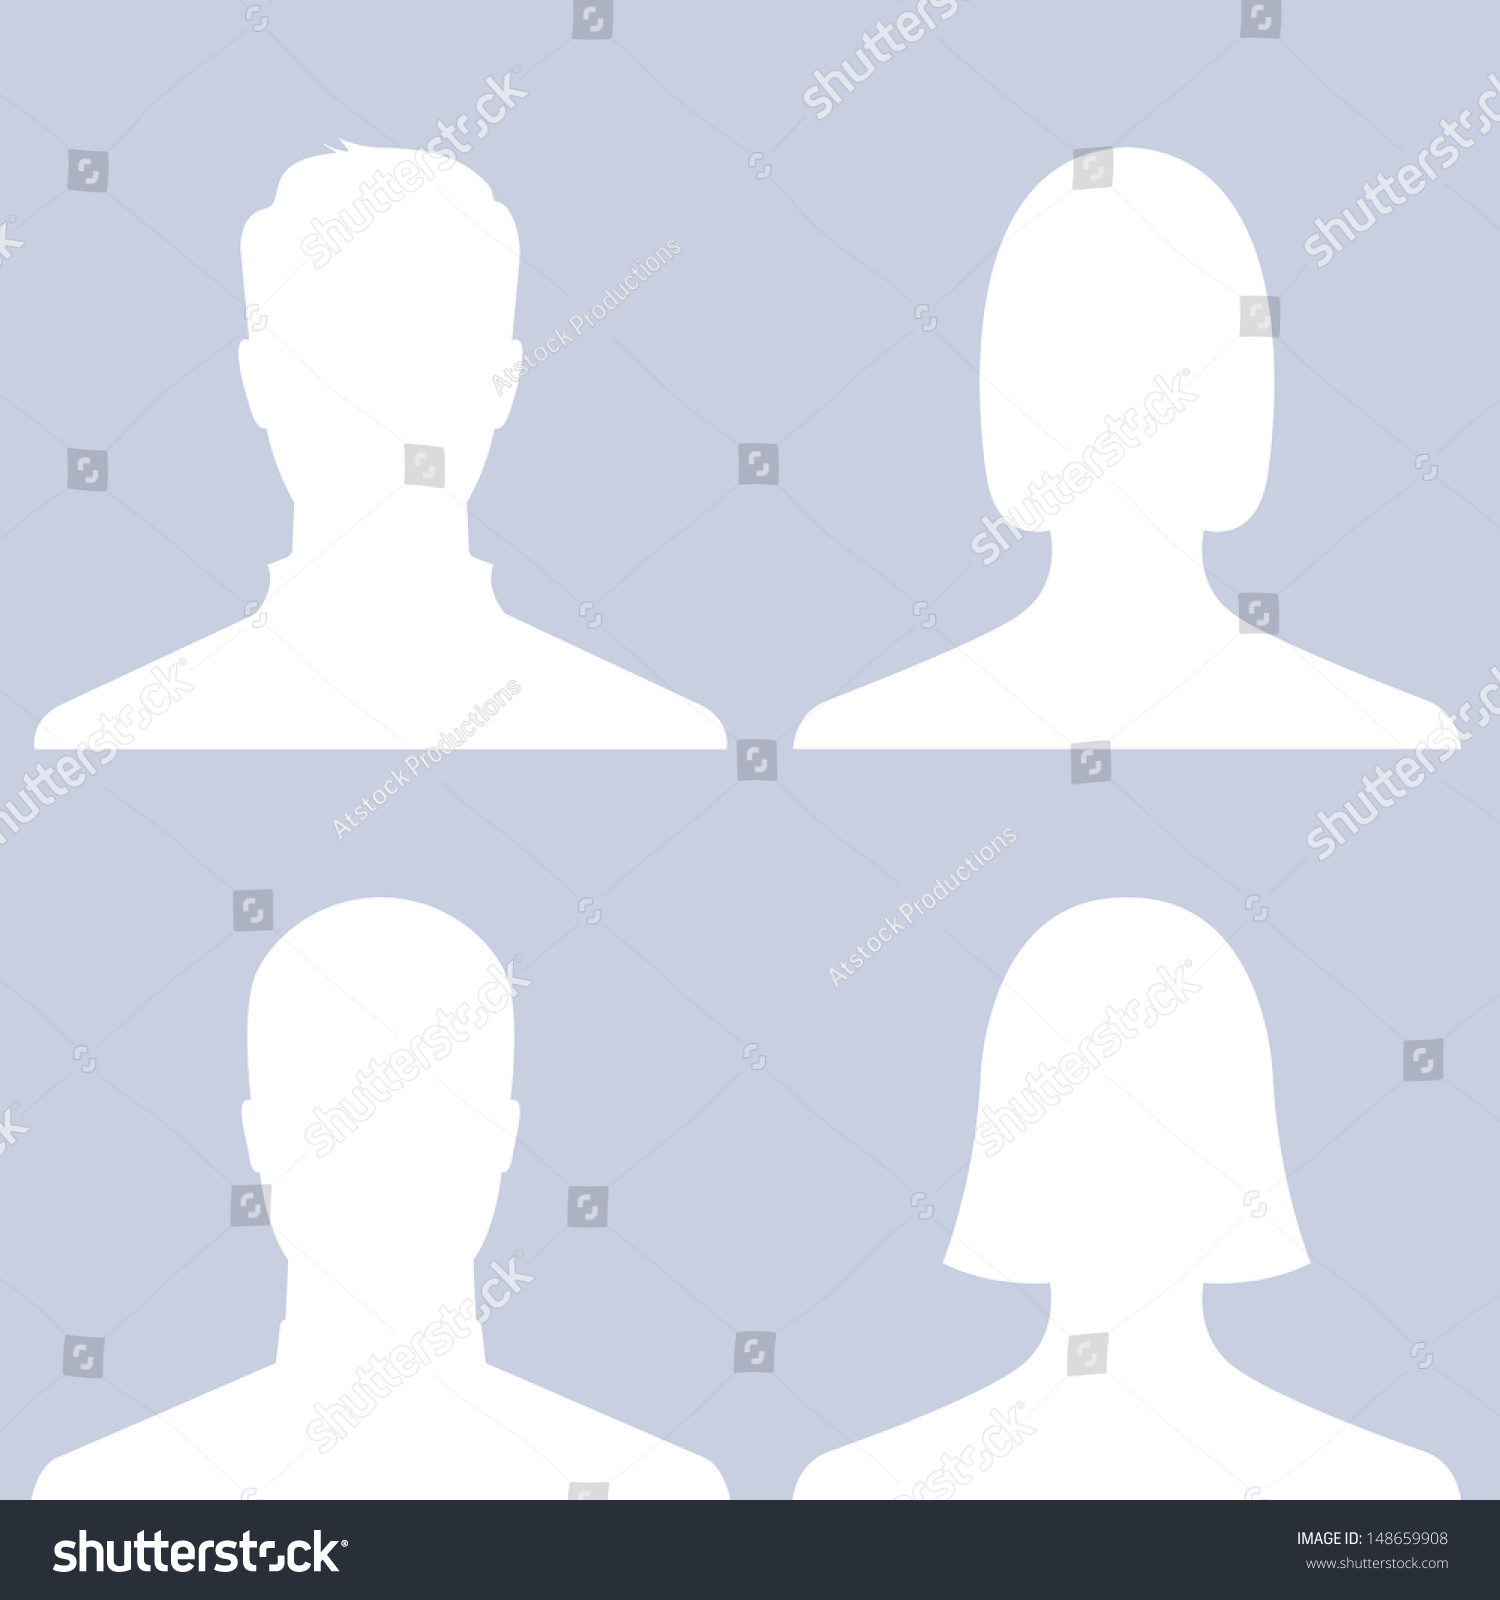 Set Of Men And Women Avatar Profile Pictures - Vector - 148659908 ...